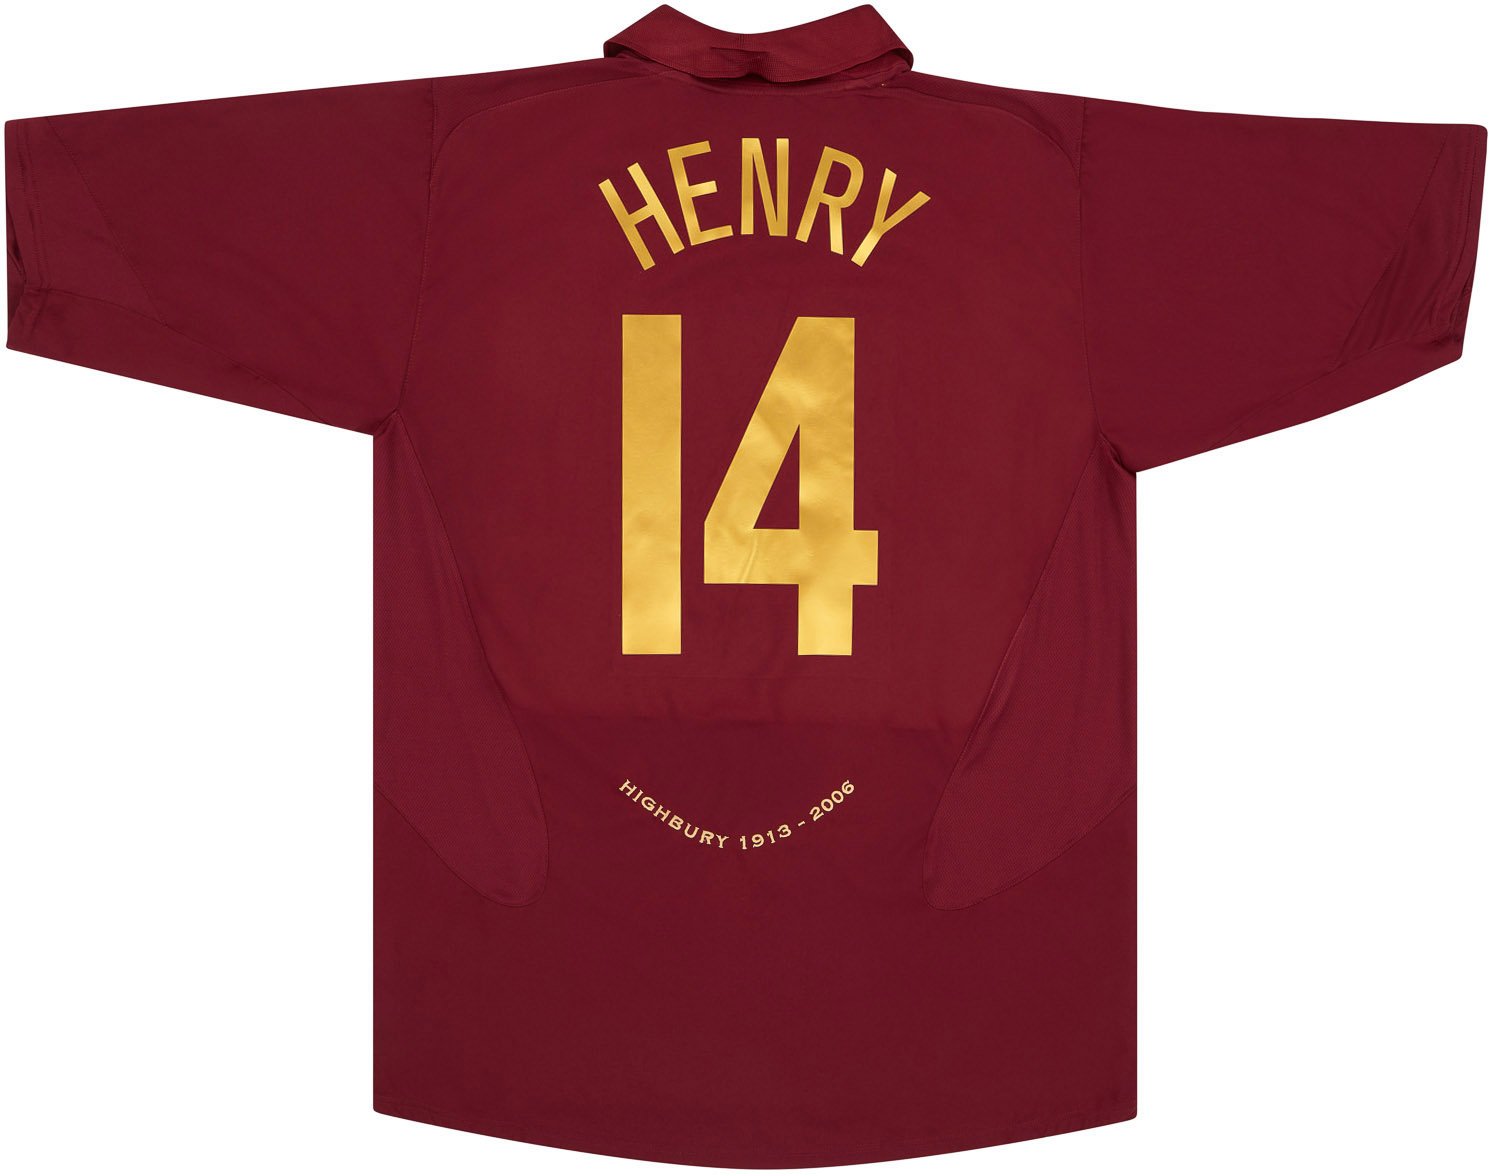 2005-06 Arsenal Home Shirt Henry #14 (Excellent) M